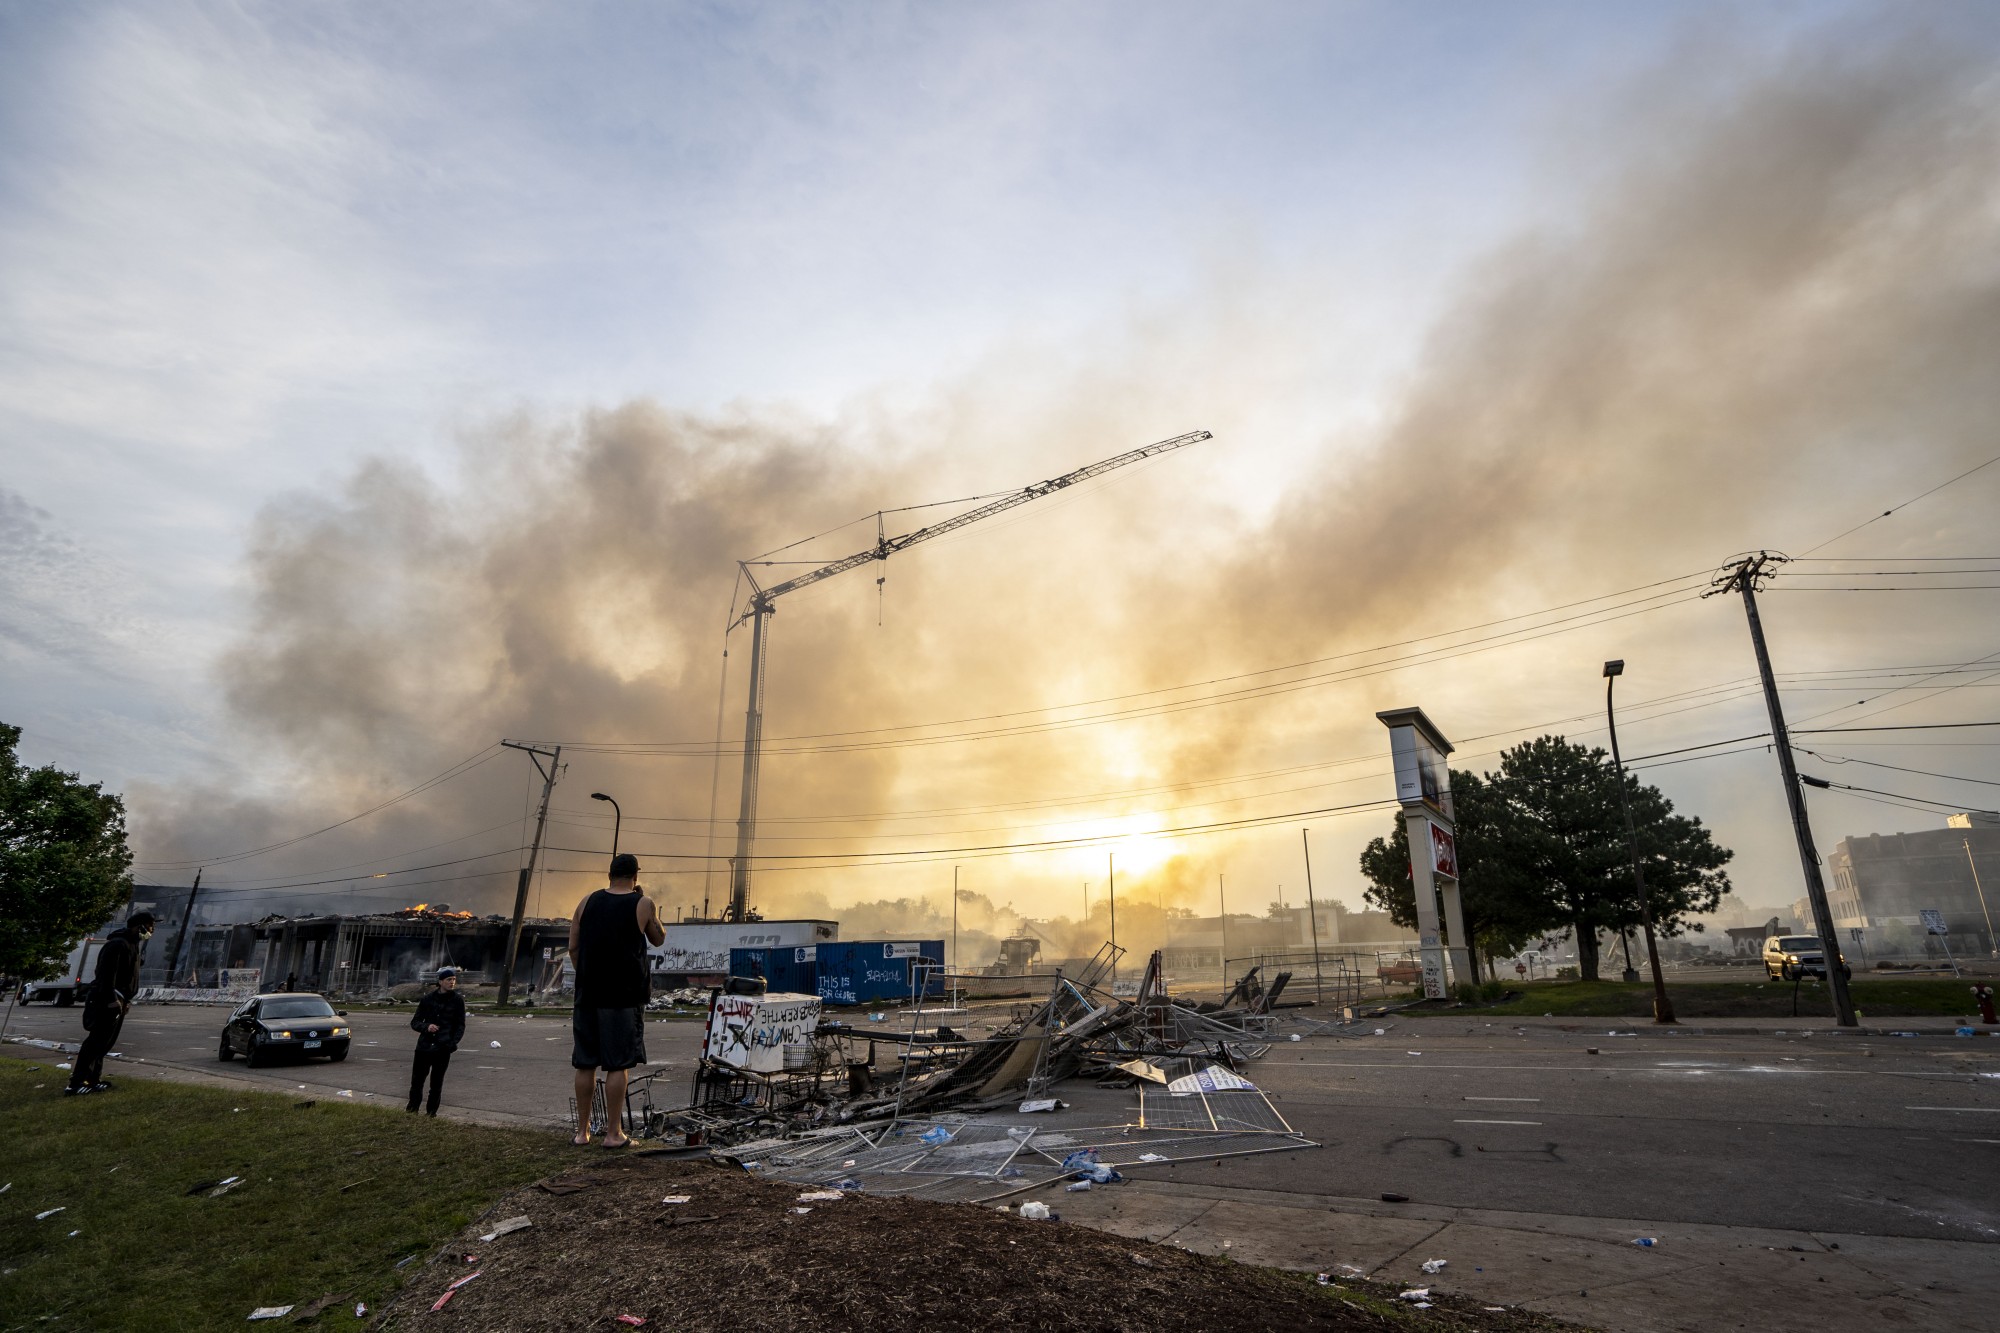 Smoke rises the morning after a second night of protests that turned violent near the Minneapolis Police 3rd Precinct following the death of George Floyd. Dozens of businesses were vandalized, and firefighters were still working to control several blazes still at hand Thursday, May 28. 